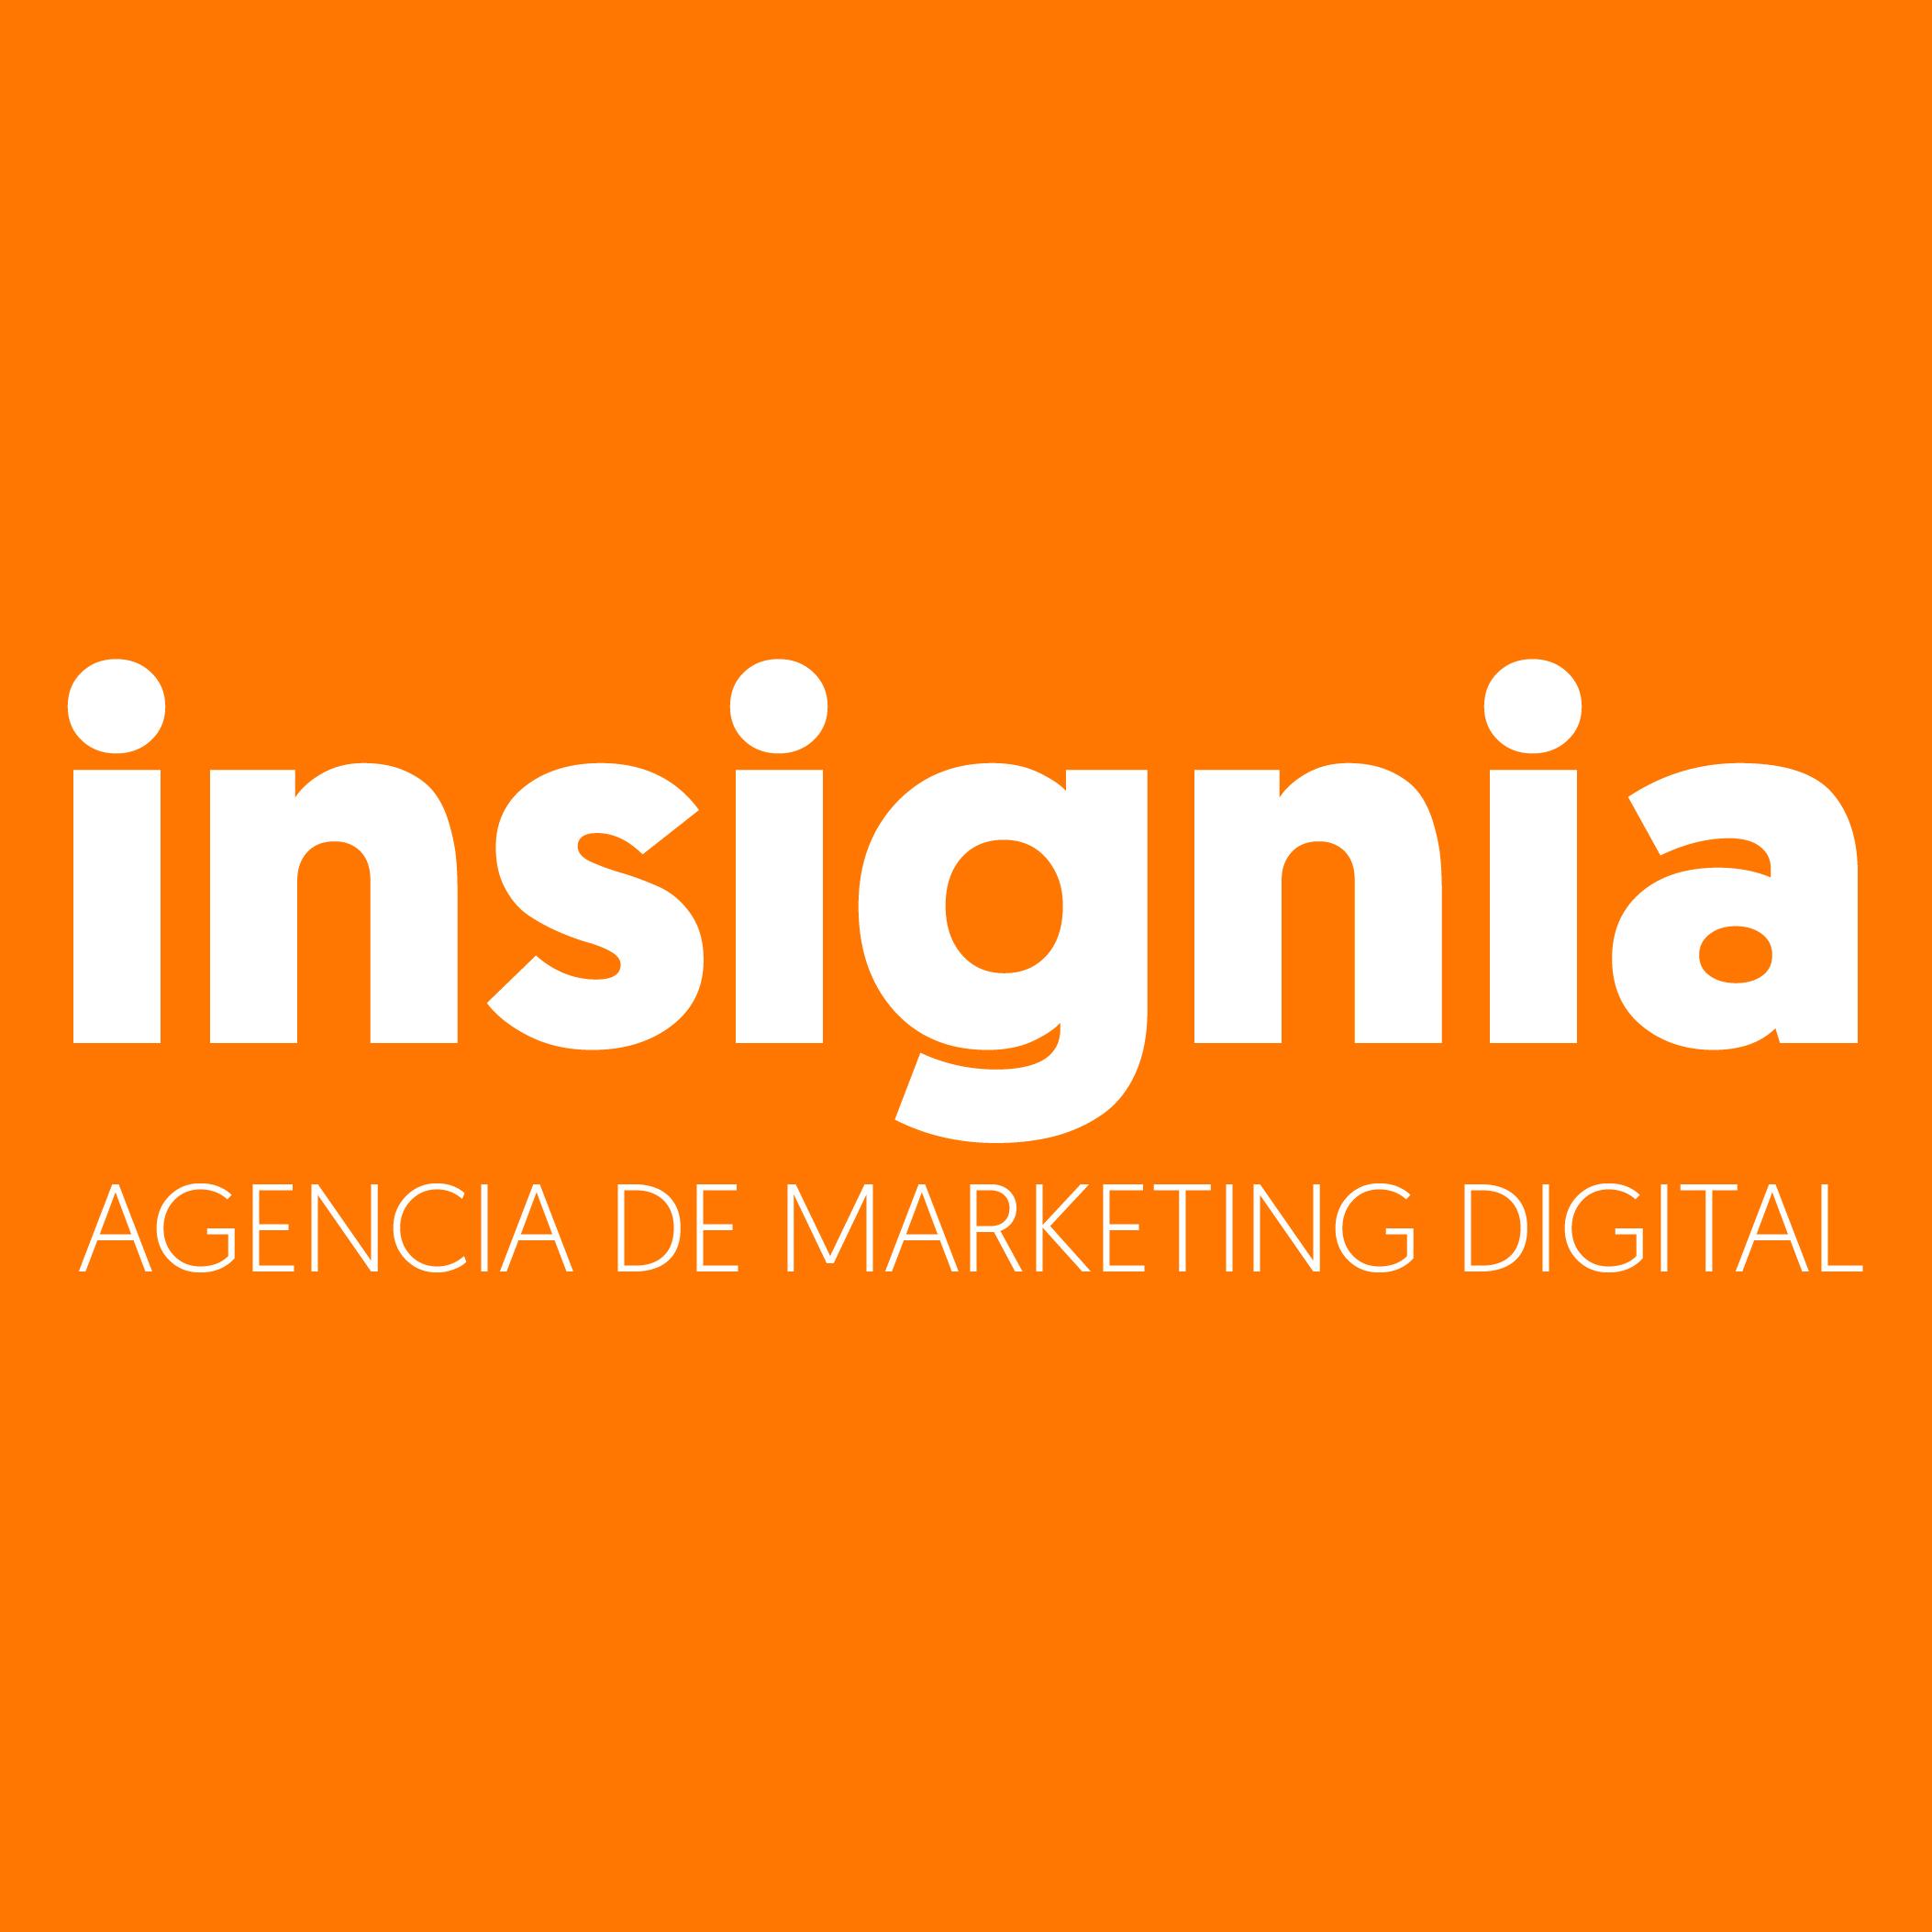 Insignia Digital profile on Qualified.One